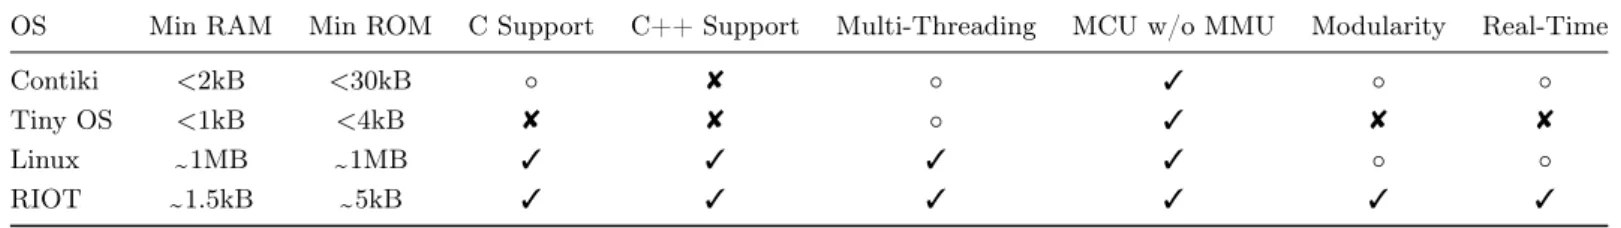 Table 1: Key characteristics of Contiki, TinyOS, Linux, and RIOT. (3) full support, ( ◦ ) partial support, (8) no support